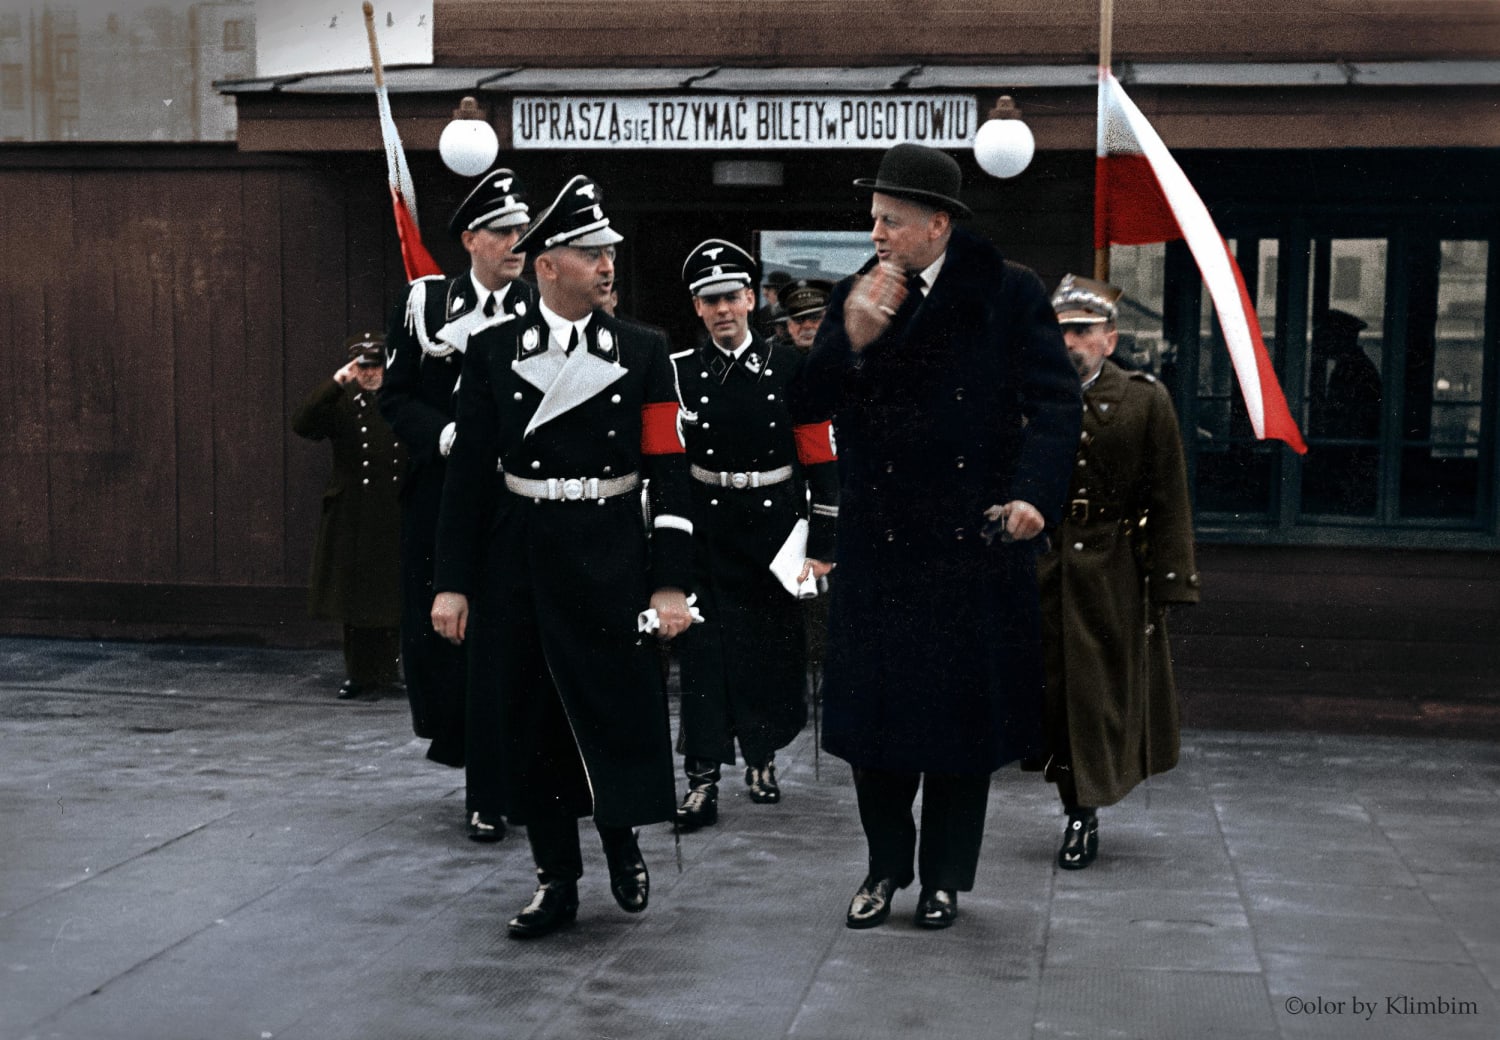 Months before the WW2 started: Feb 1939, Heinrich Himmler, the Reichsführer of the SS and Chief of the German Police, during his visit to Warsaw. He is accompanied by General Józef Zamorski, the Chief of the Polish State Police, and Hans von Moltke, the German Ambassador to Poland